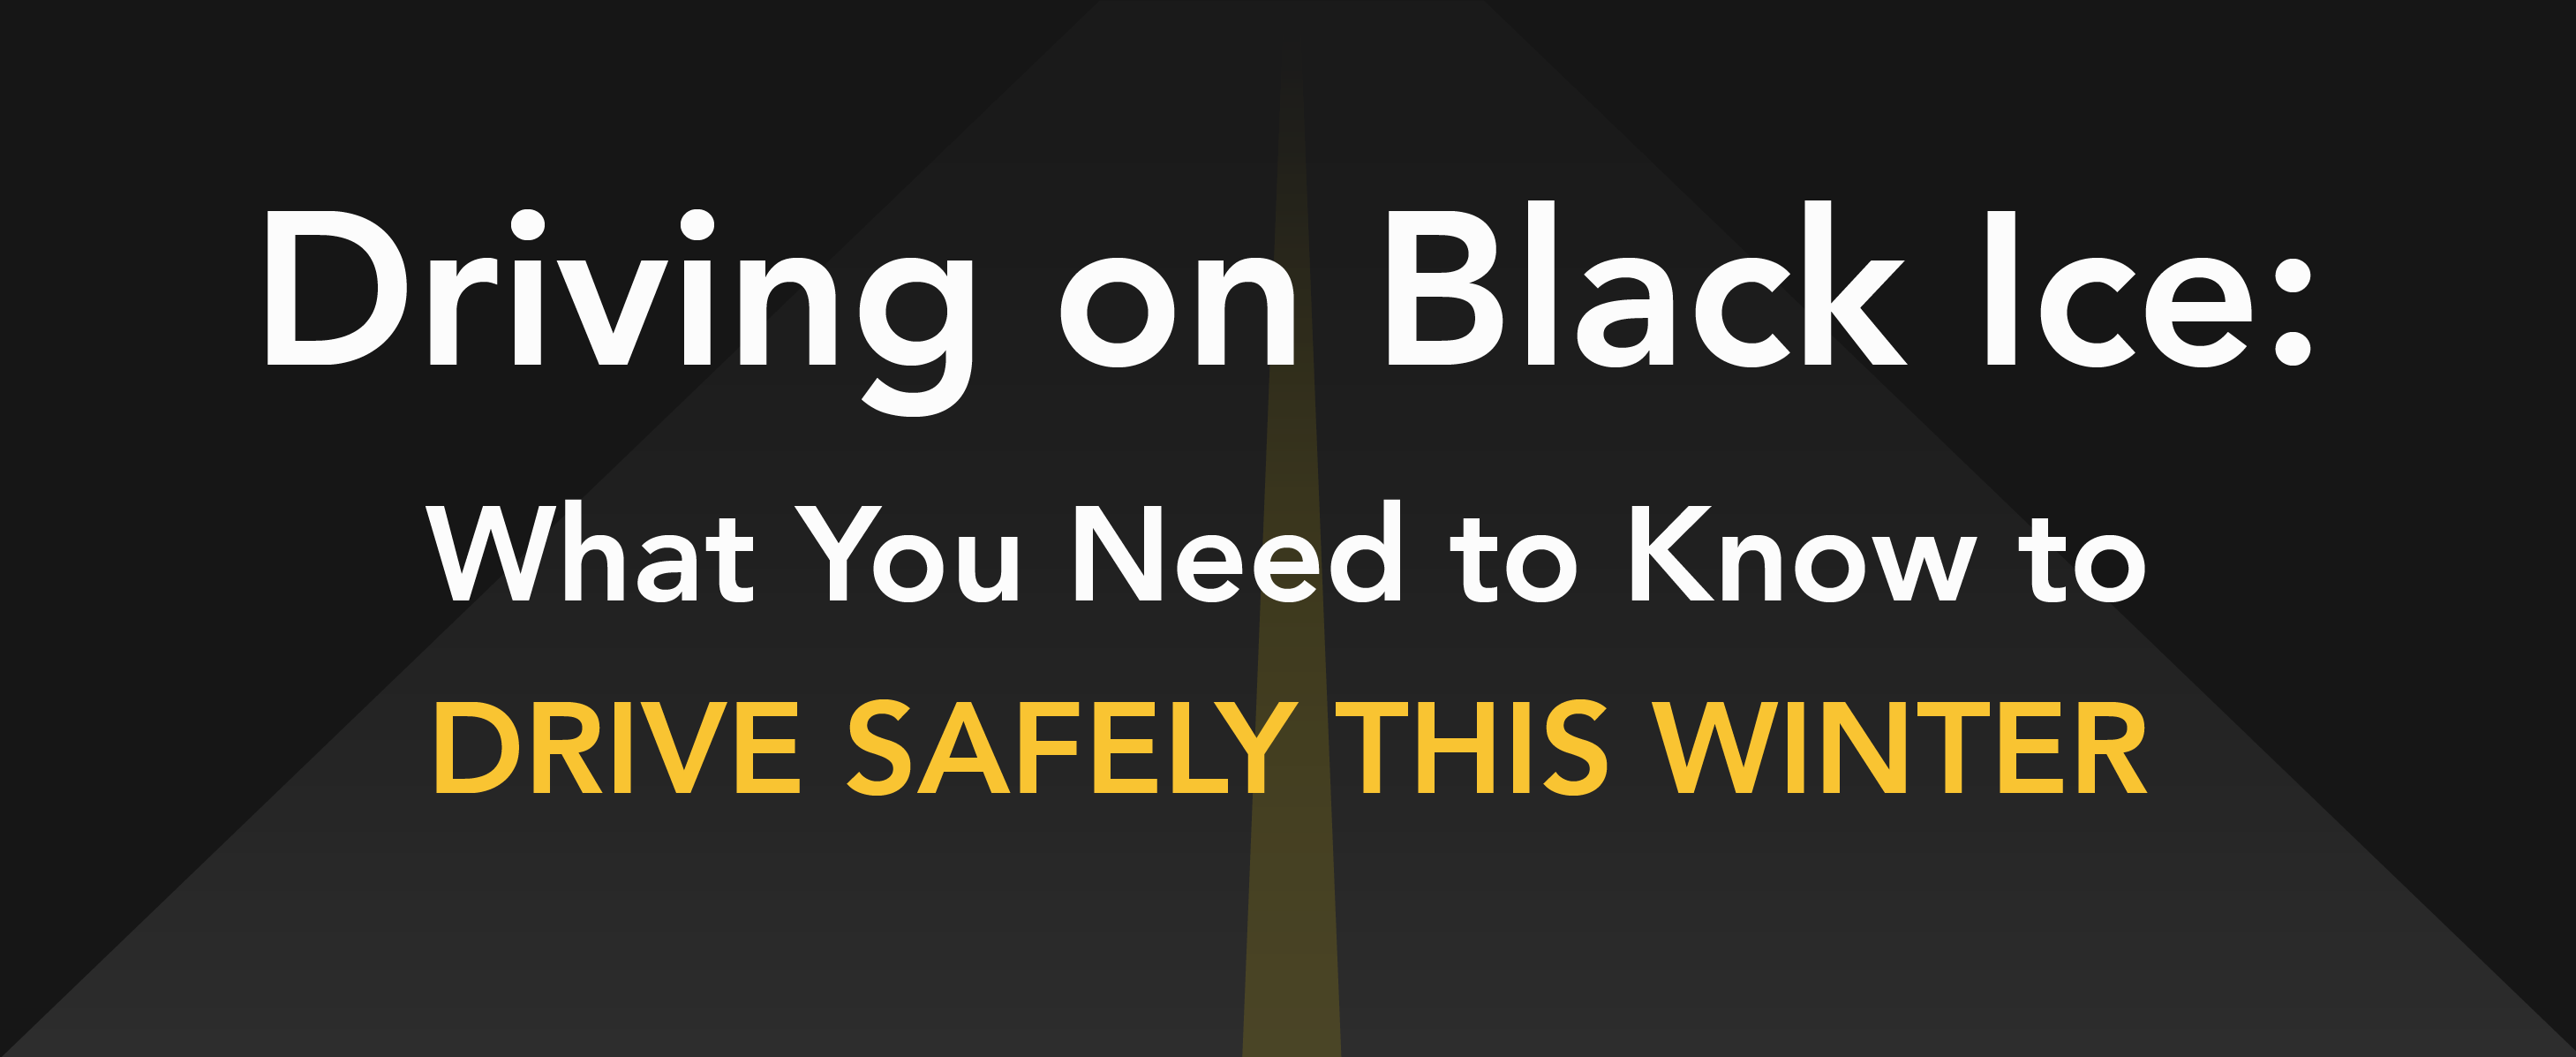 Driving on black ice: what you need to know to drive safely this winter